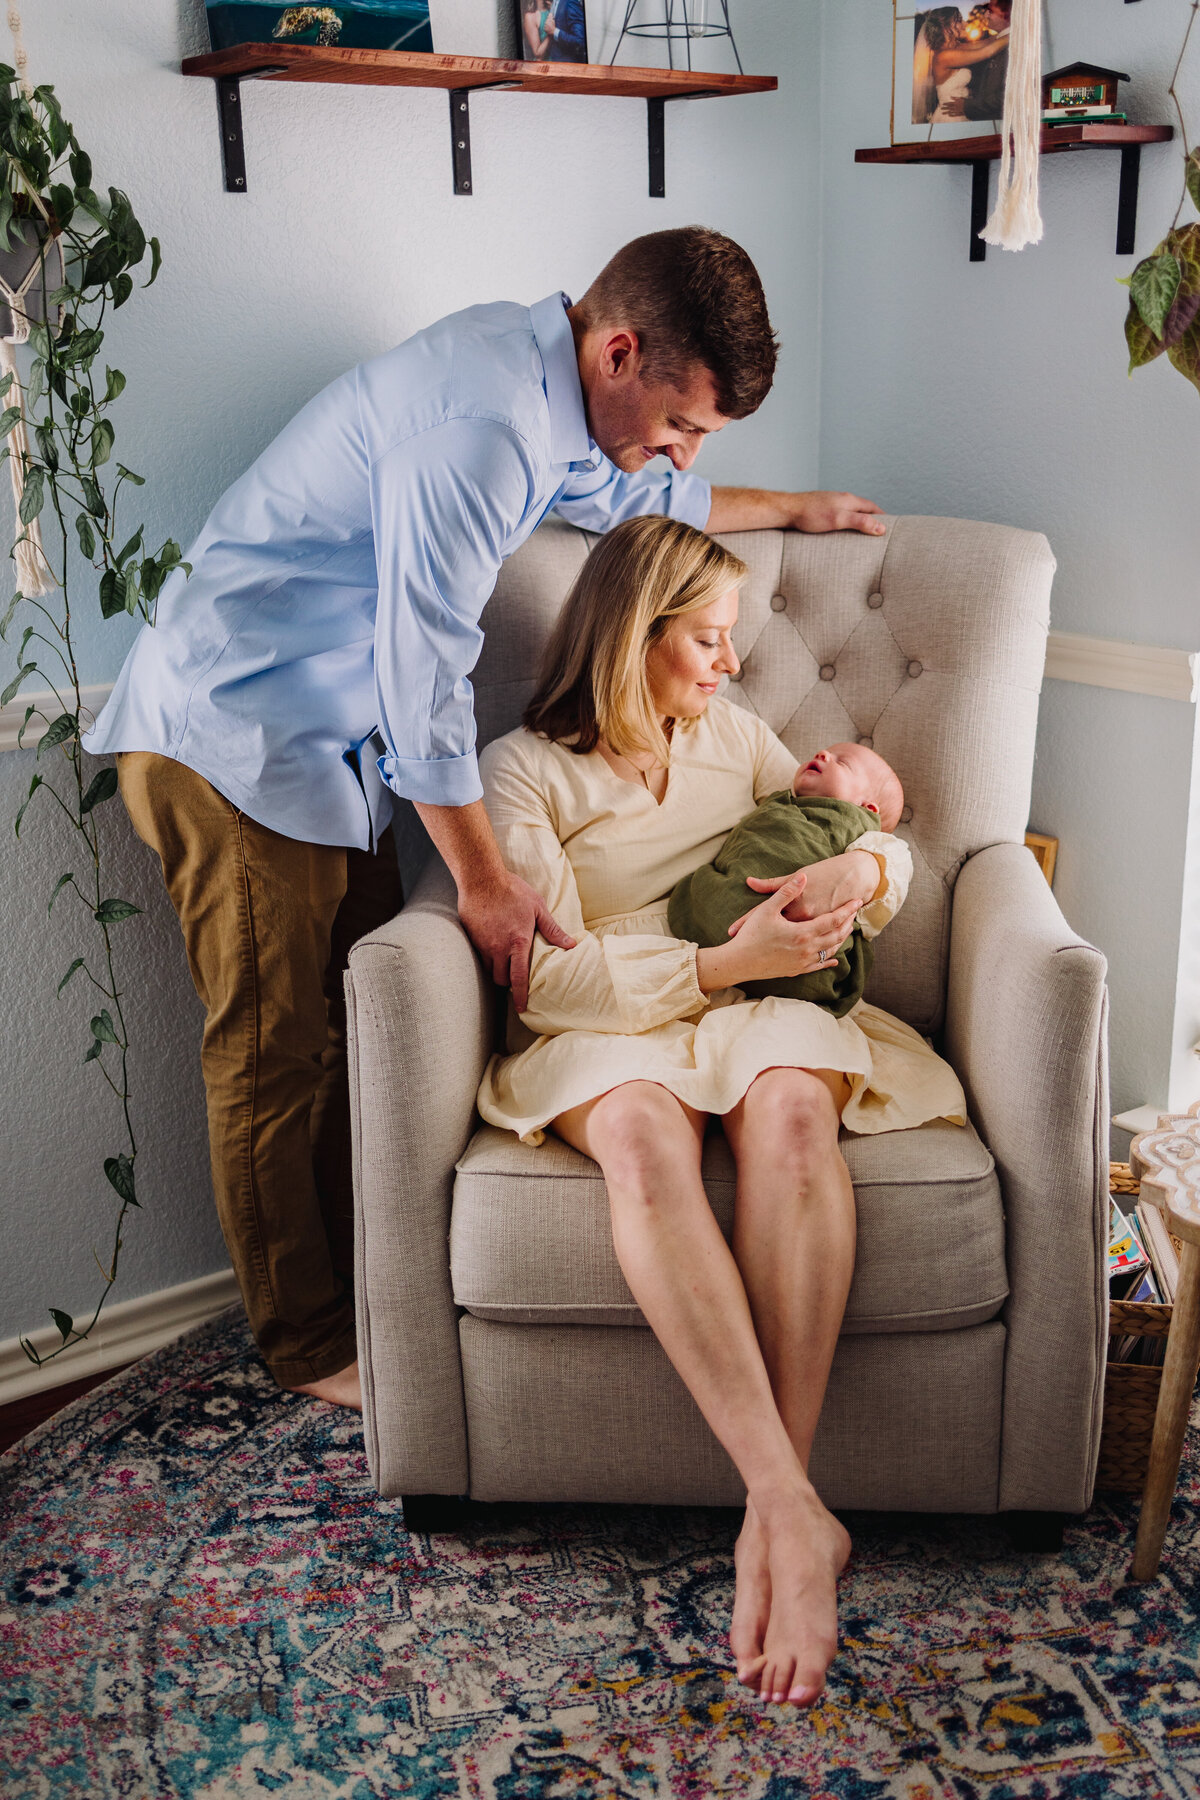 Photograph of a family with their newborn child, the woman is sitting on a white sofa and in her hands she is holding the crying baby with a green blanket. The father is looking at him and is wearing a blue shirt and brown pants